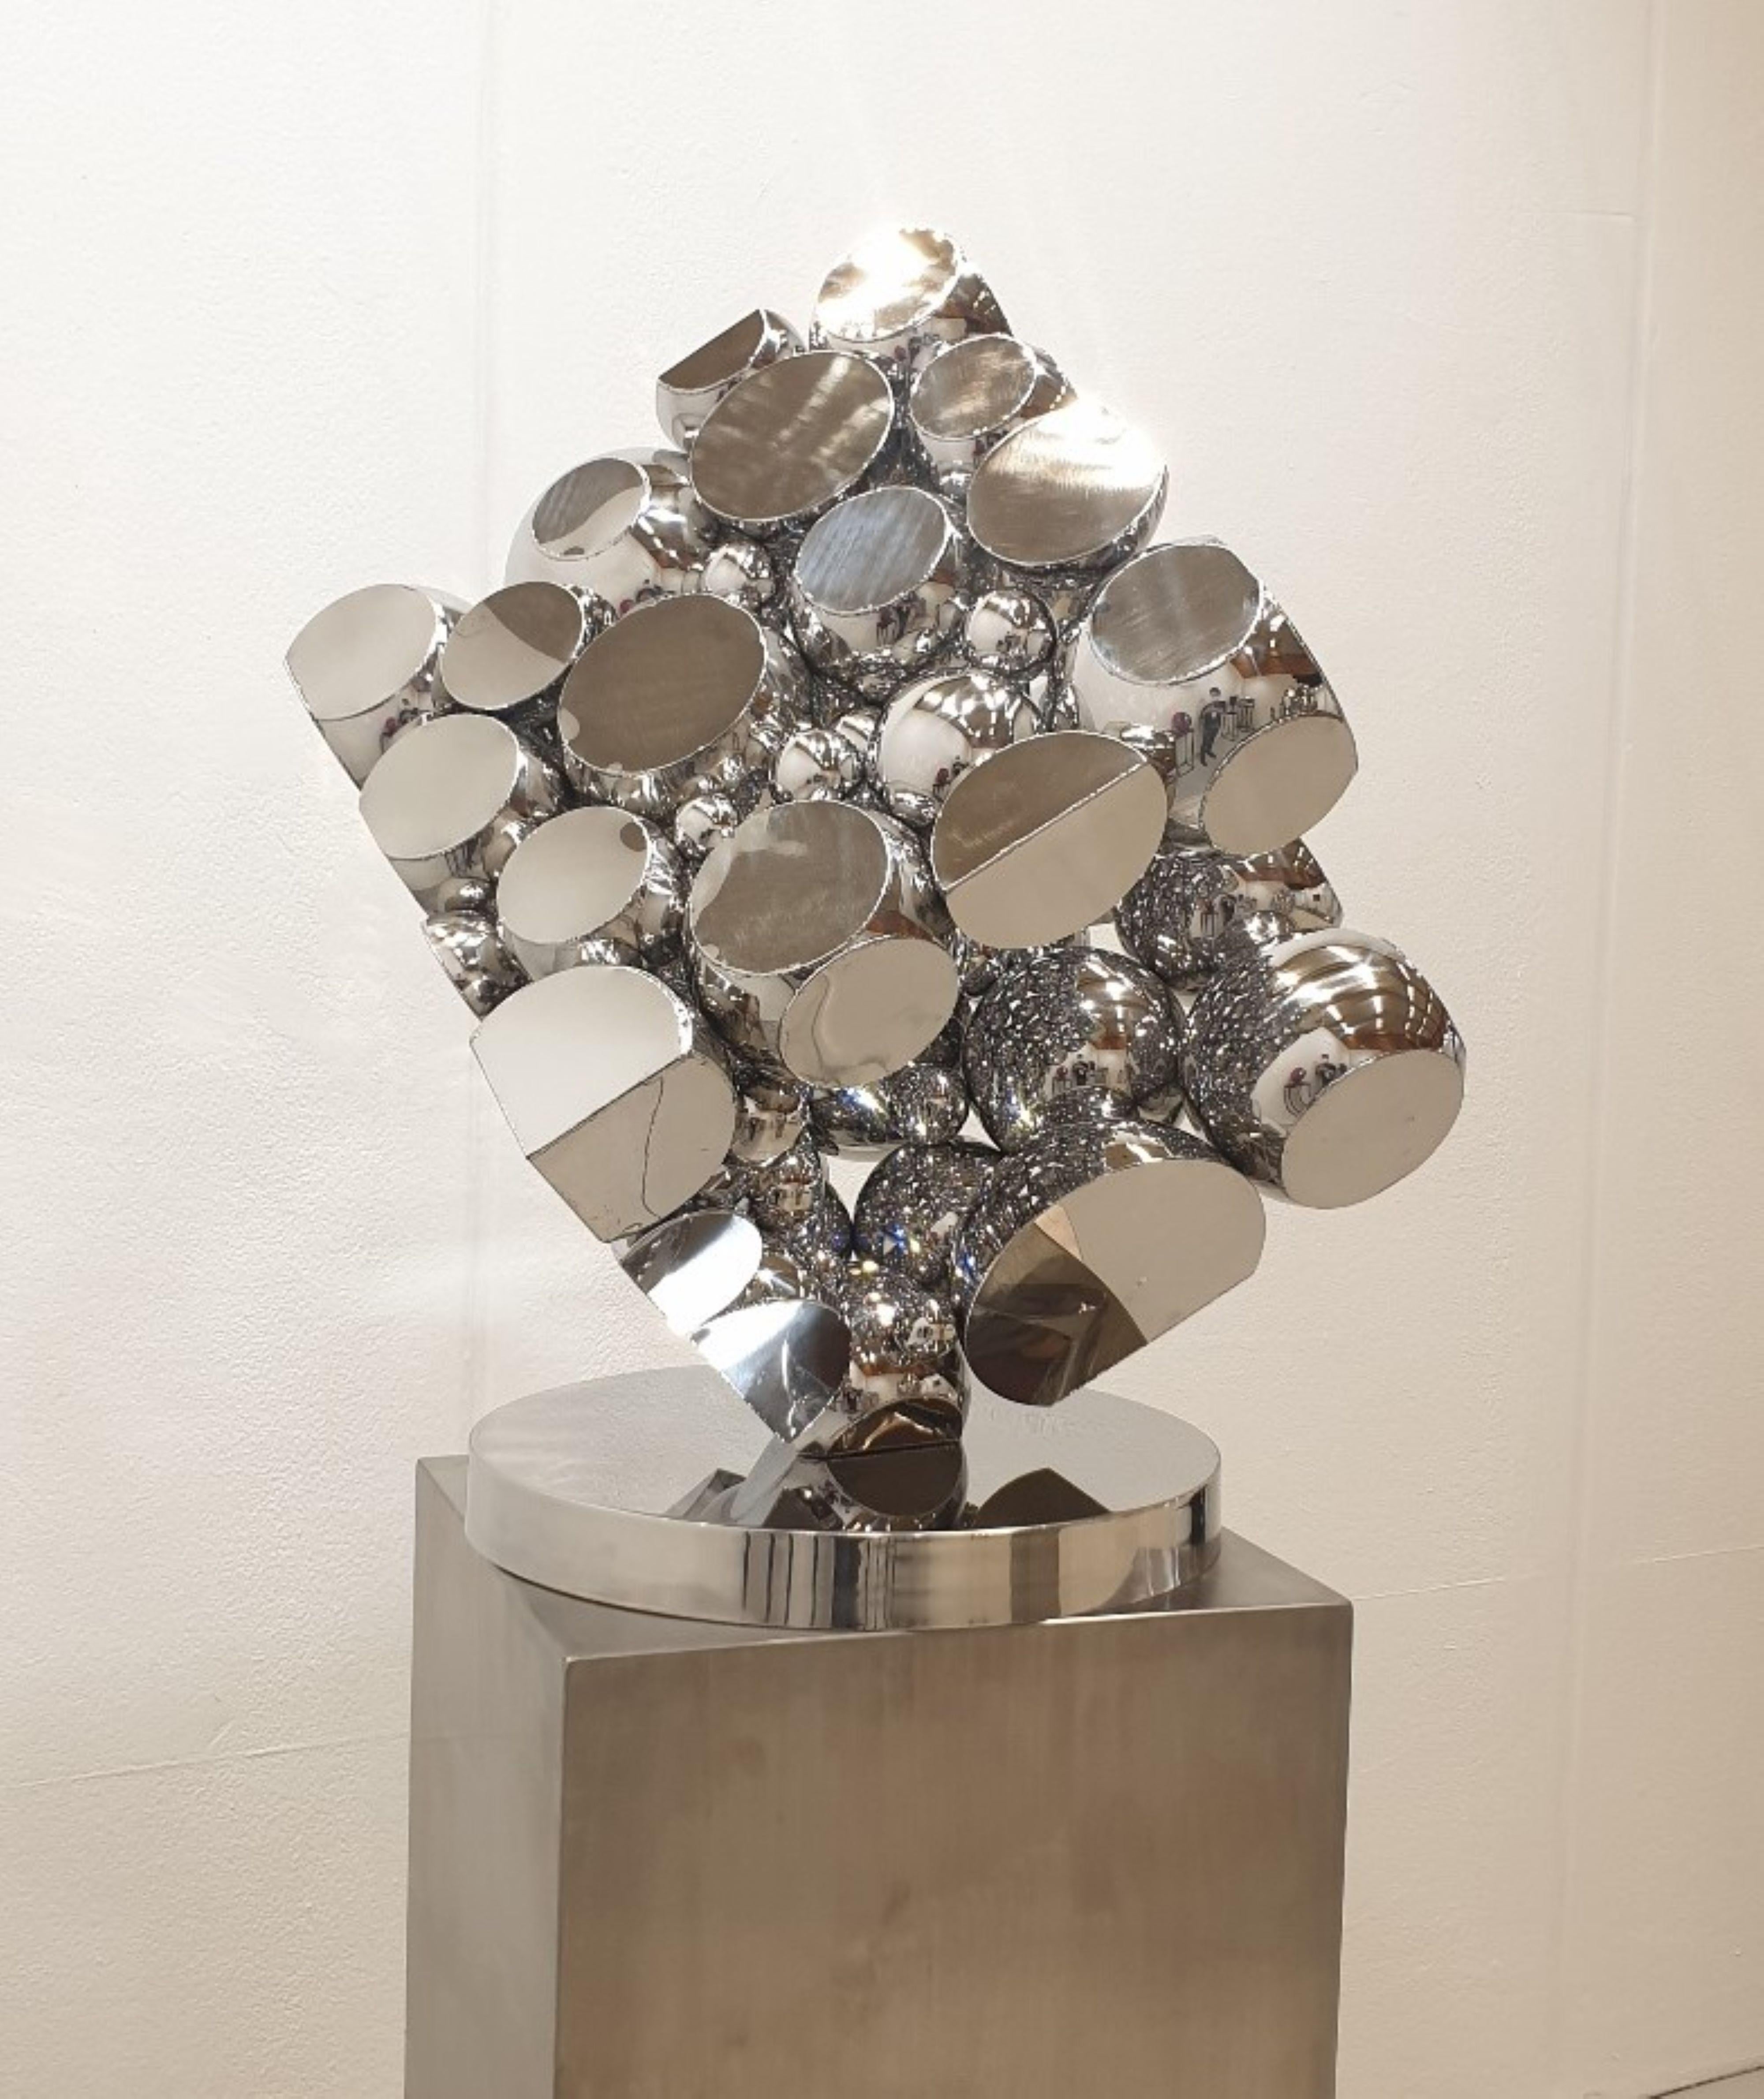 Infinity Cube - Other Art Style Sculpture by Lee Song Joon